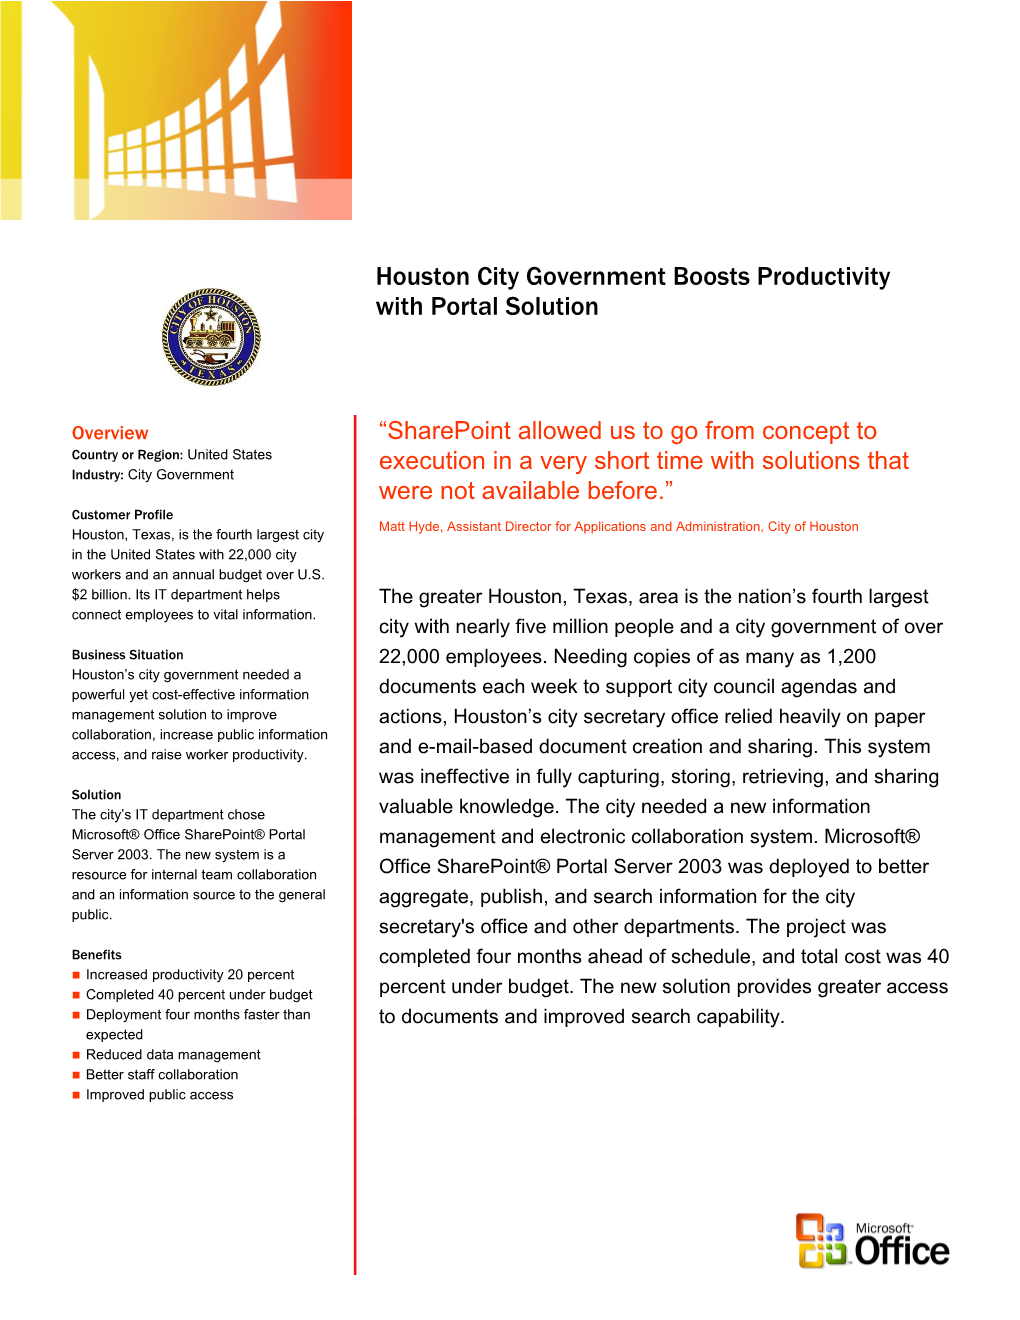 Houston City Government Boosts Productivity with Portal Solution